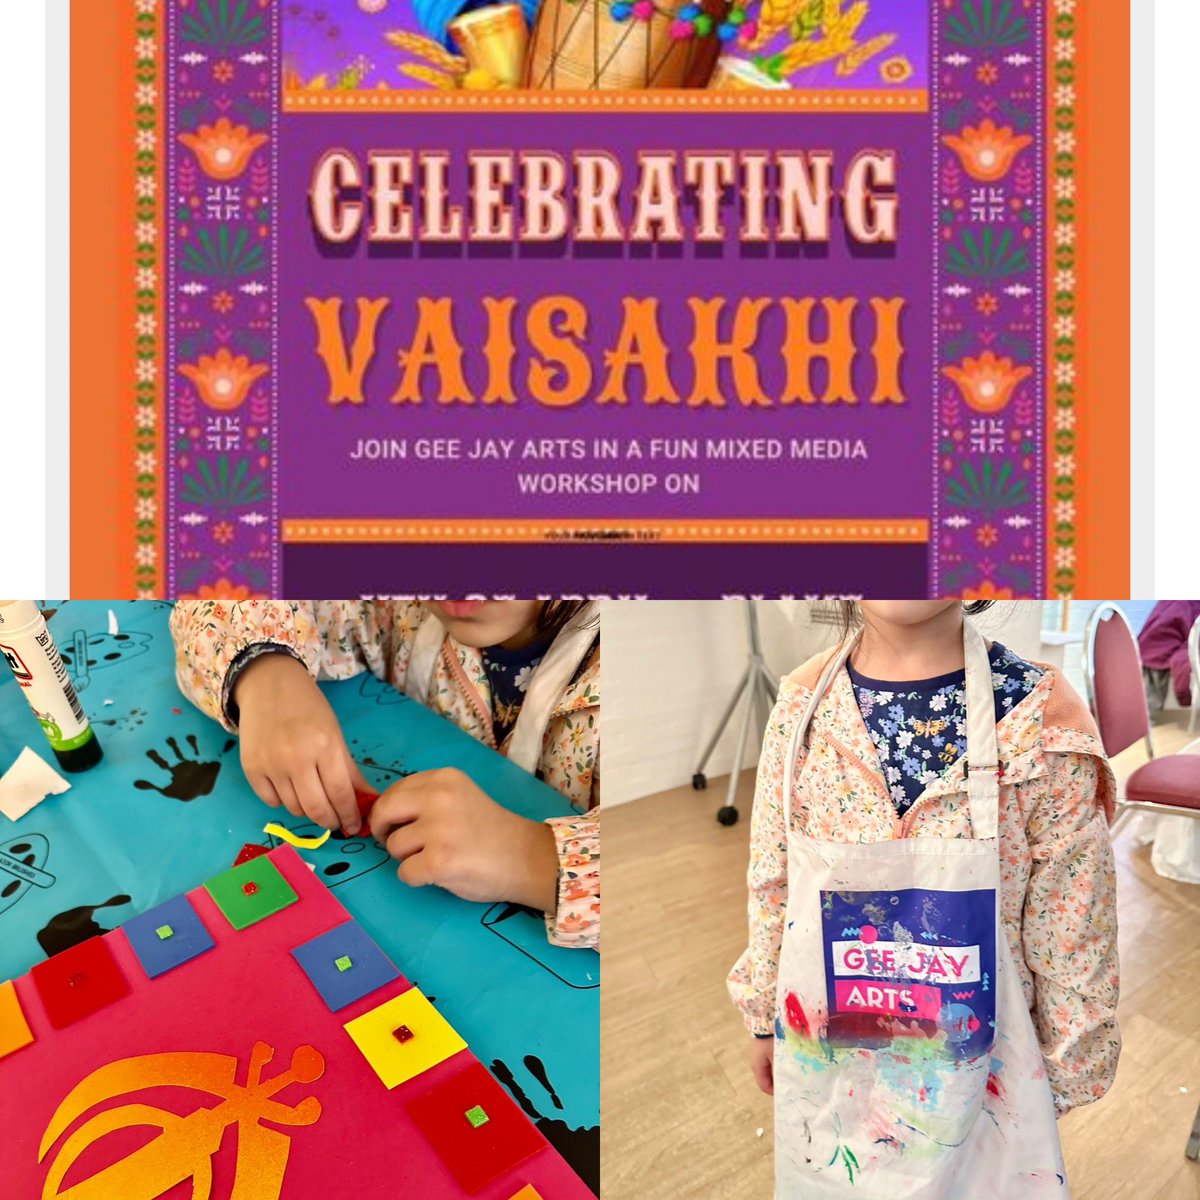 Thank you so much Gee Jay arts and St George’s Arts Centre for this wonderful Vaisakhi fun workshop today at the Woodville, Gravesend. It was great & Varda loved every bit of decorating her piece. We are looking forward to the next one! @graveshambc @TheWoodville @StGeorgesCentre